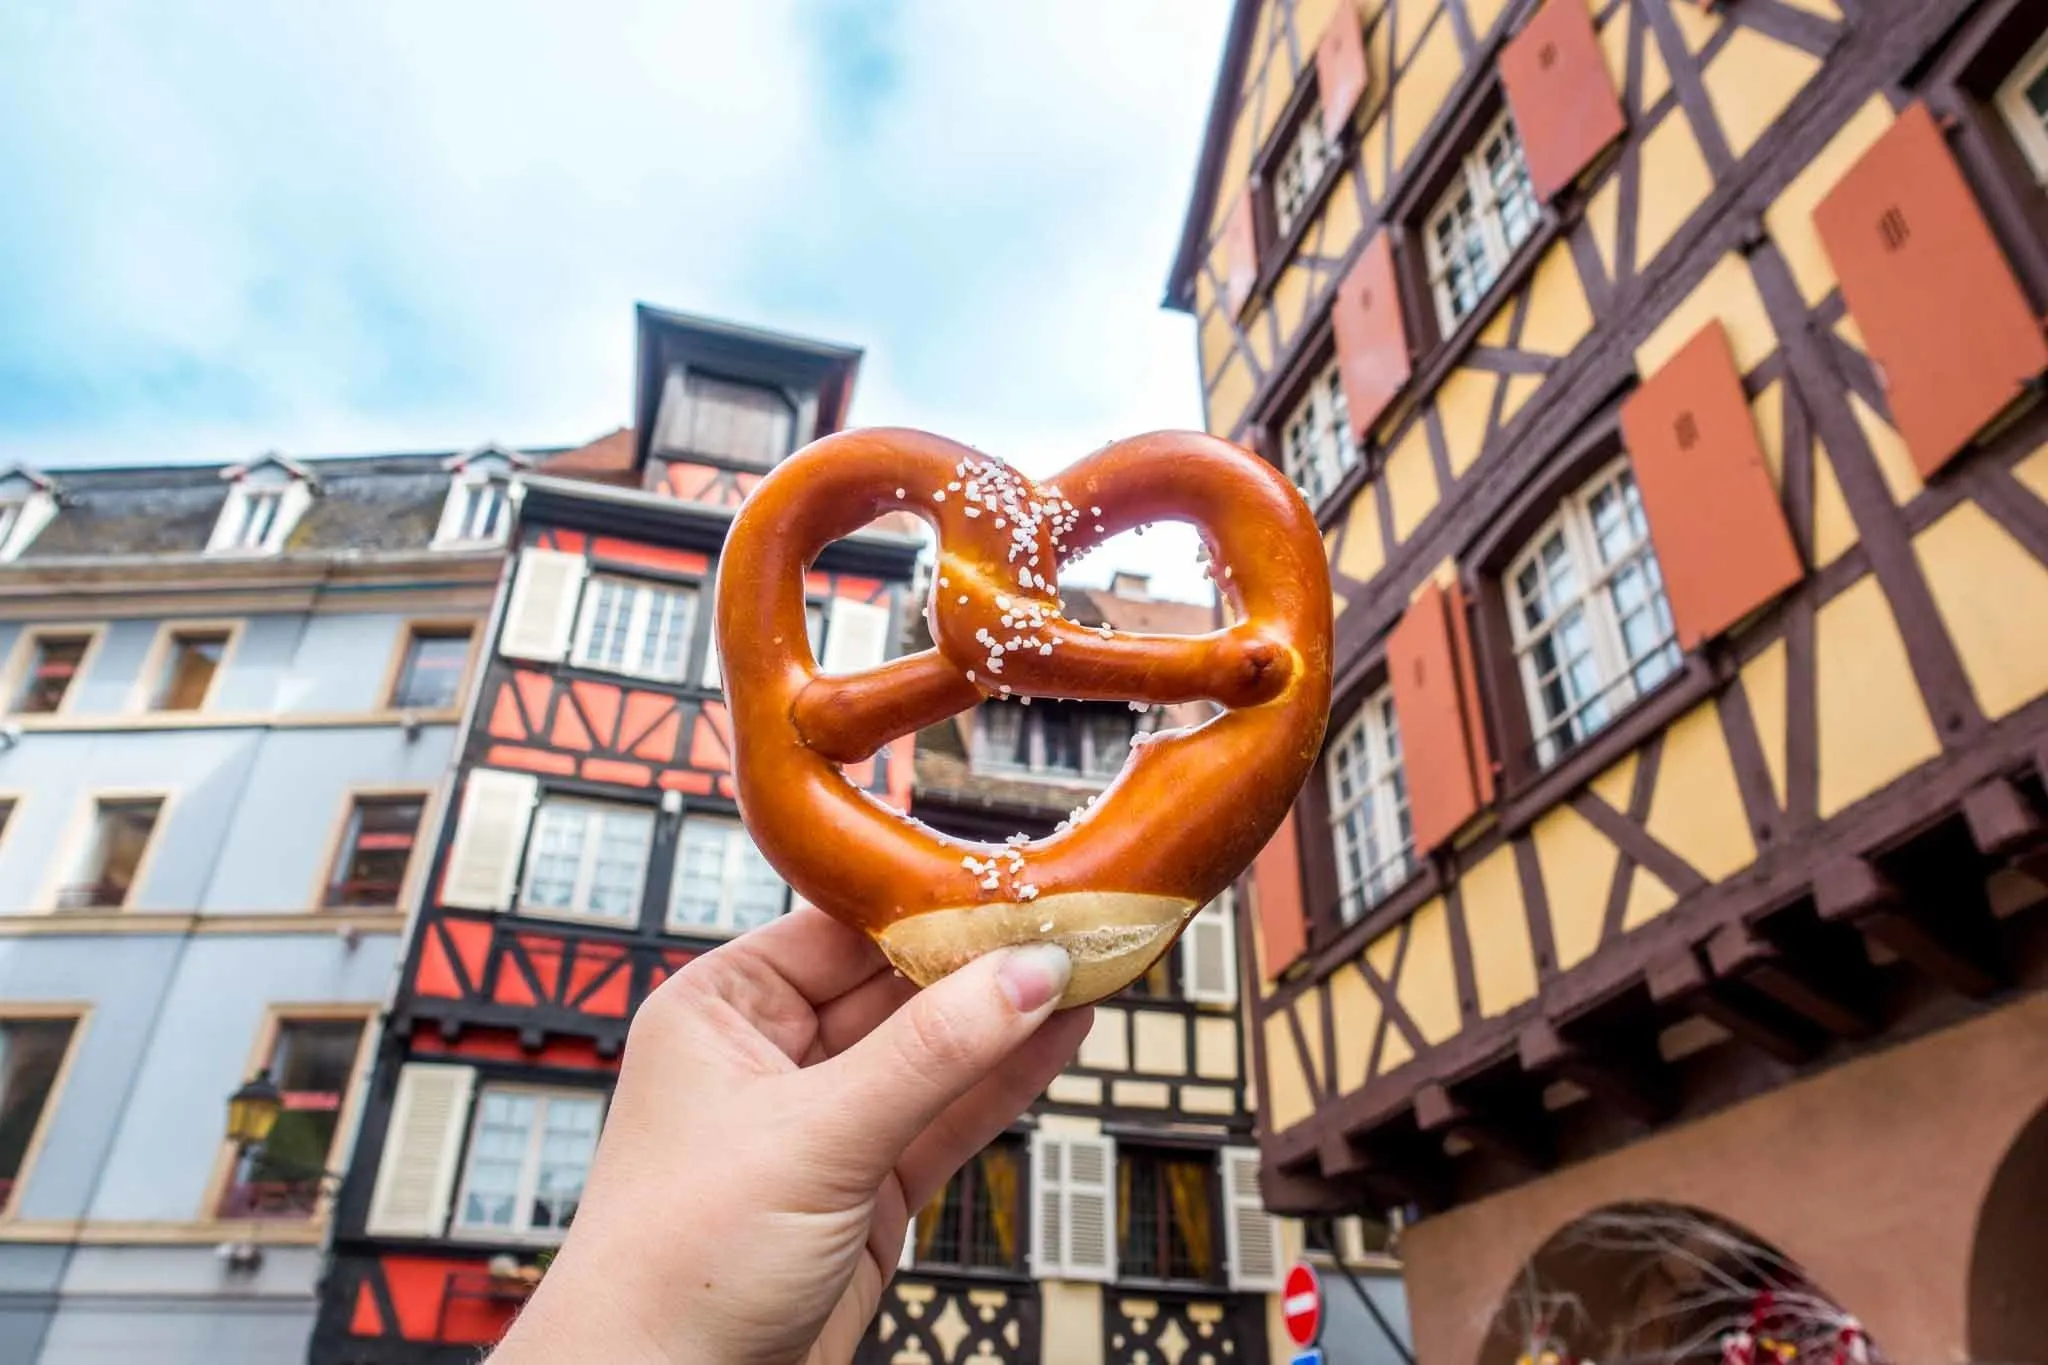 Pretzel in front of traditional Alsace buildings